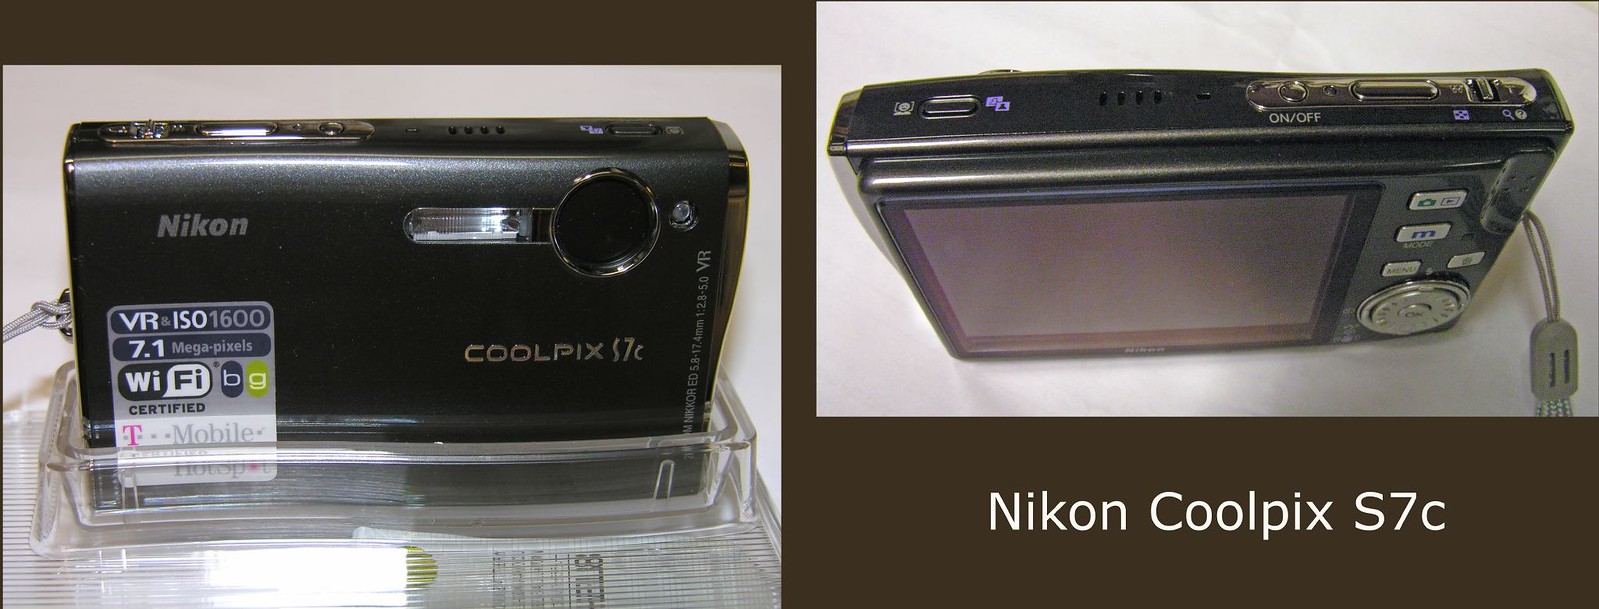 Nikon Coolpix S7c - Front and Back